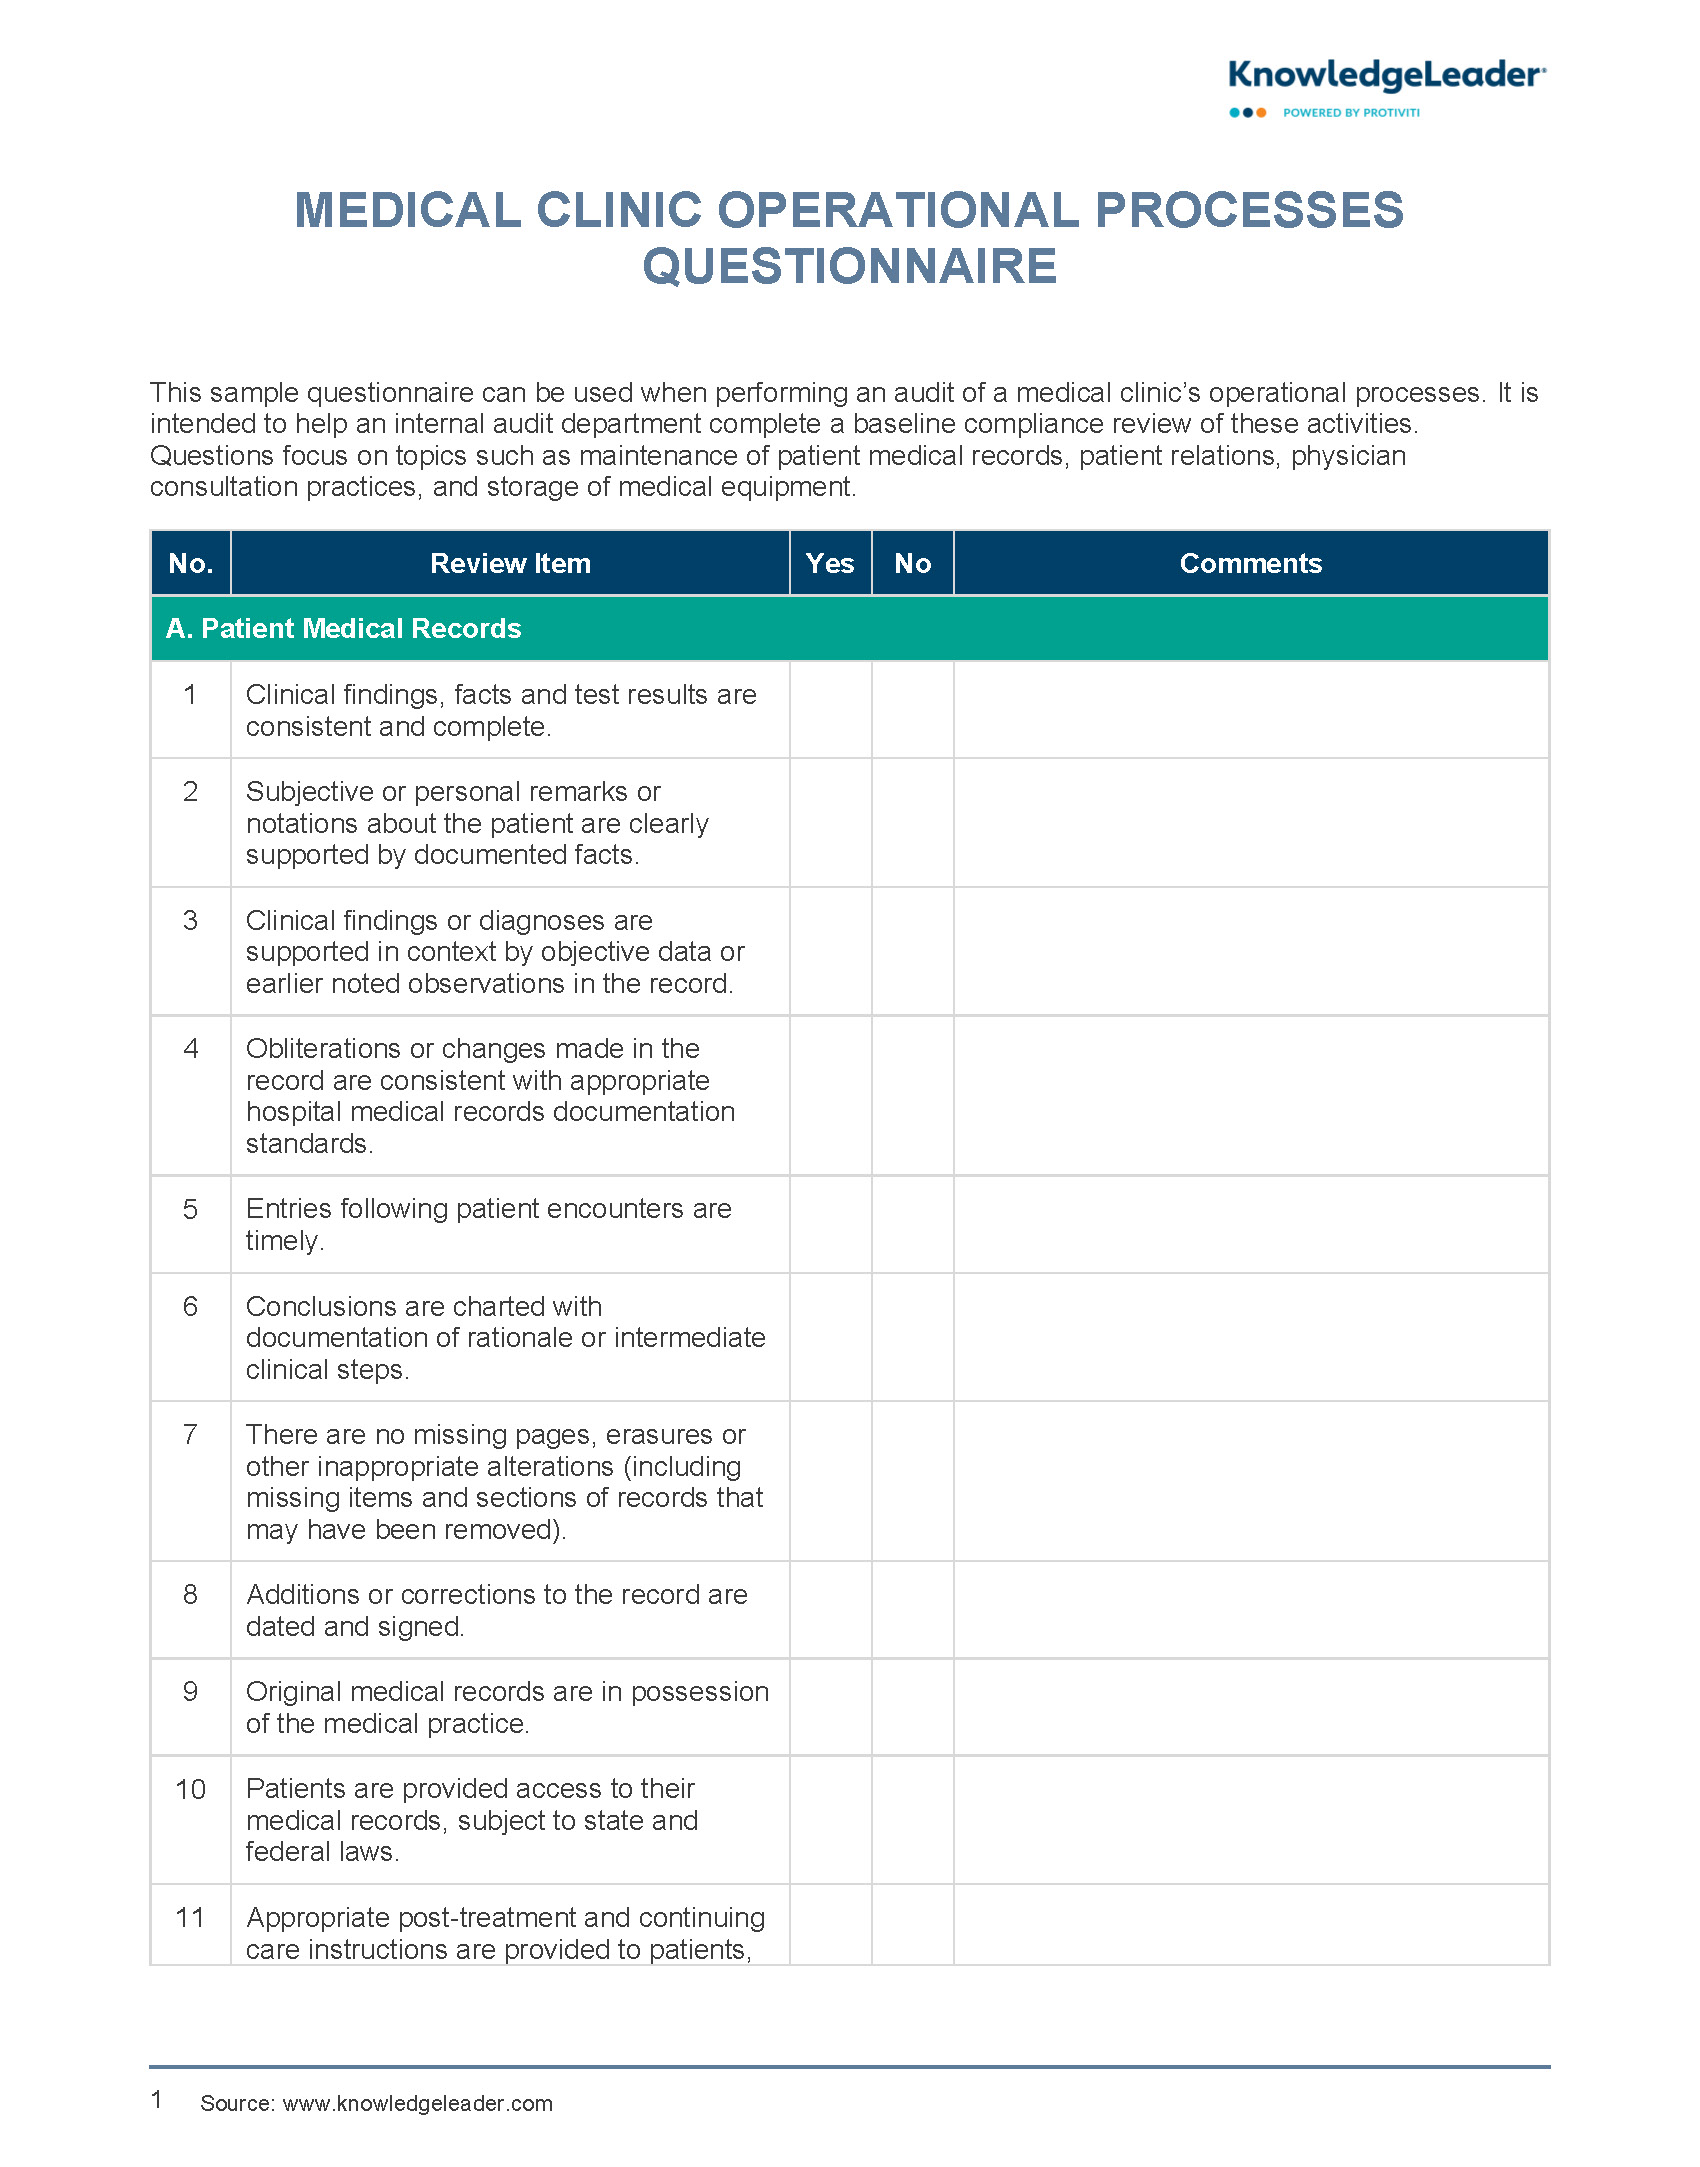 Medical Clinic Operational Processes Questionnaire